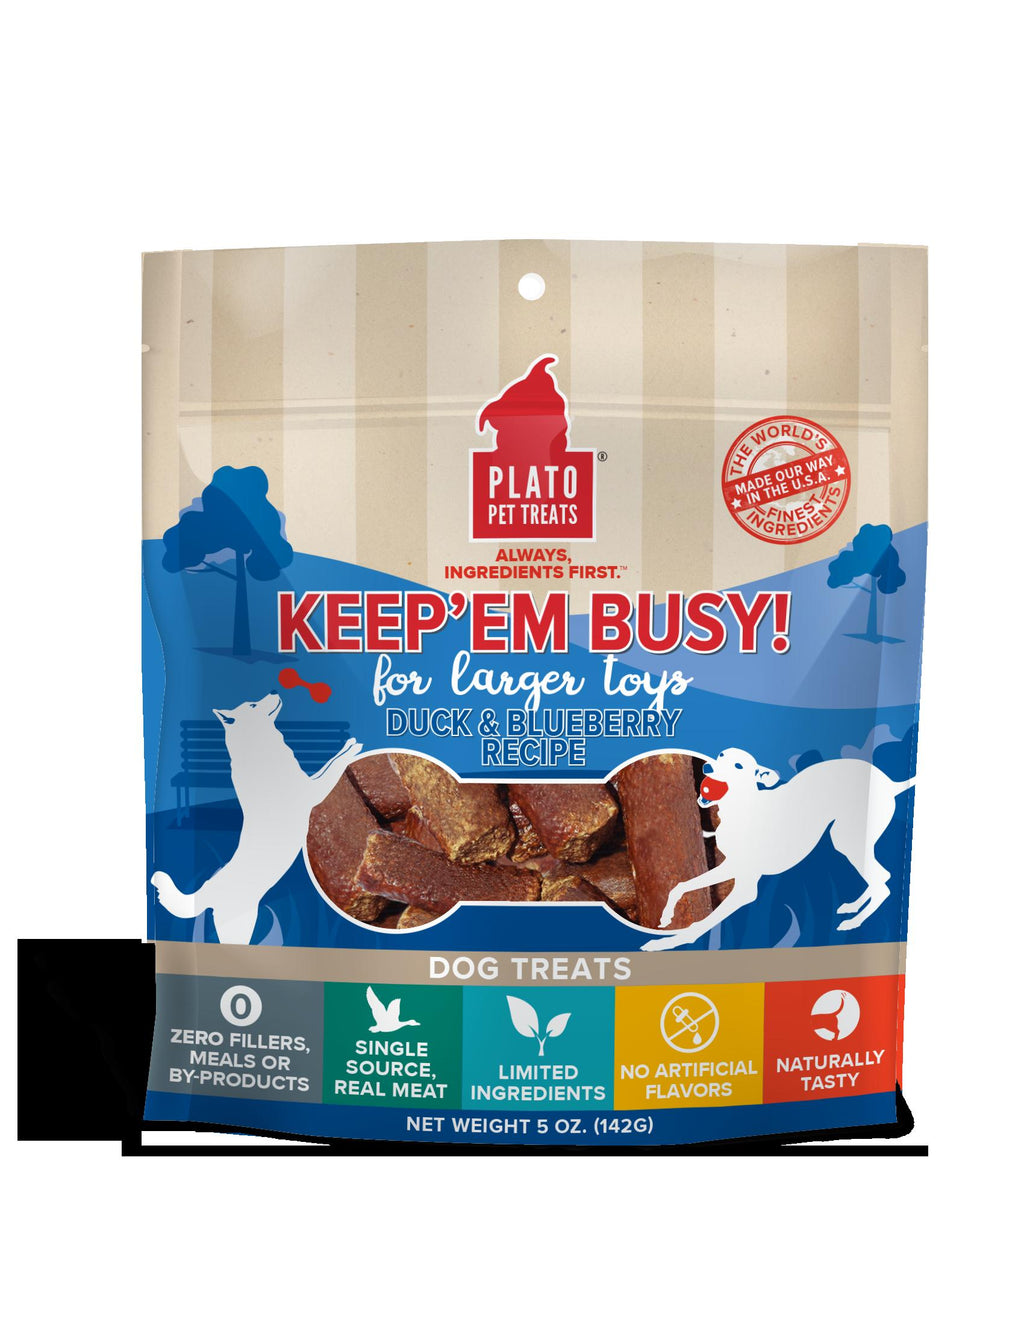 Plato Pet Treats Keep 'em Busy Duck & Blueberry Treats for Large Toys Dehydrated Dog Tr...